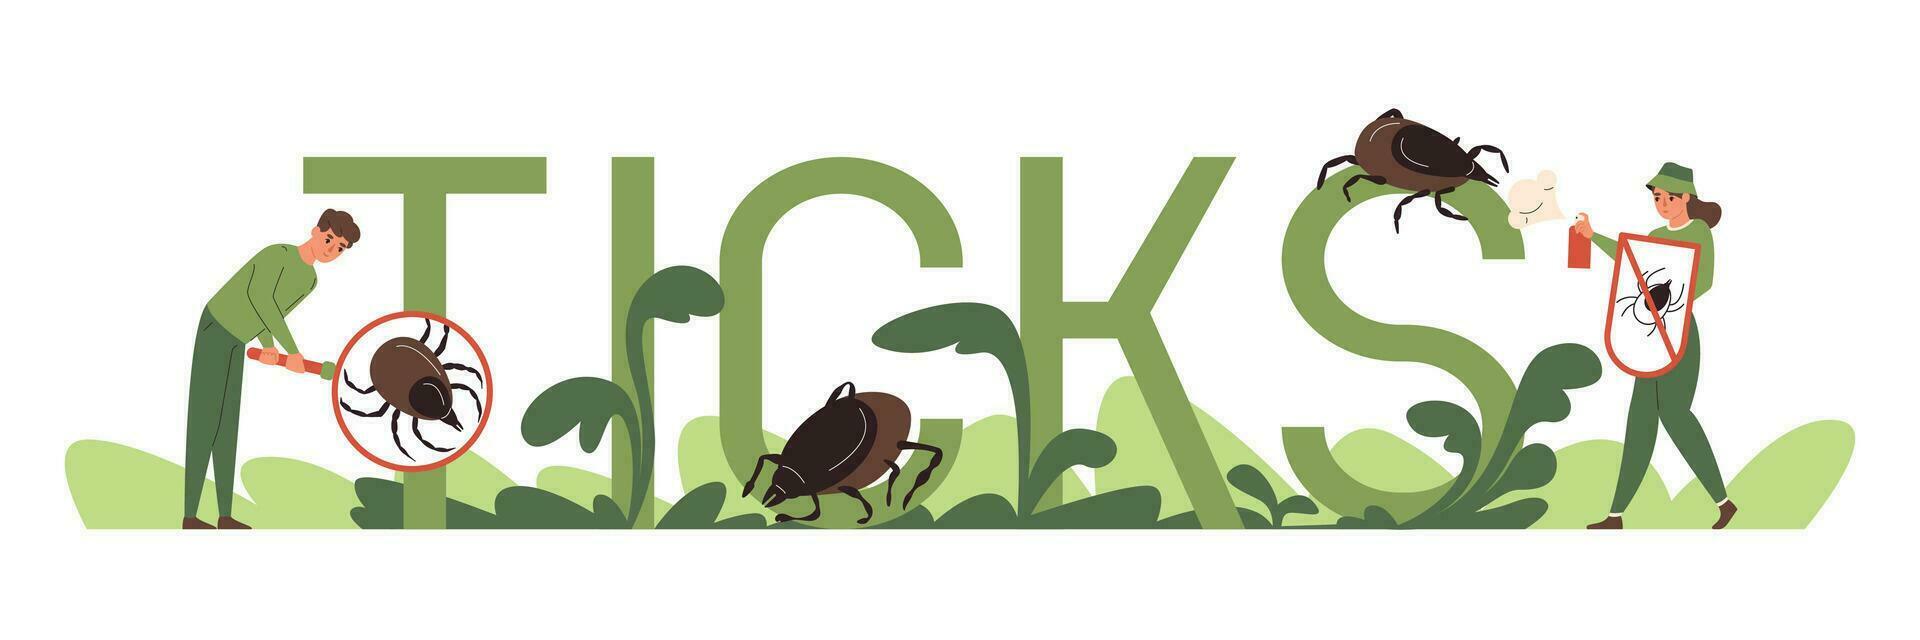 Insects Ticks Text Concept vector